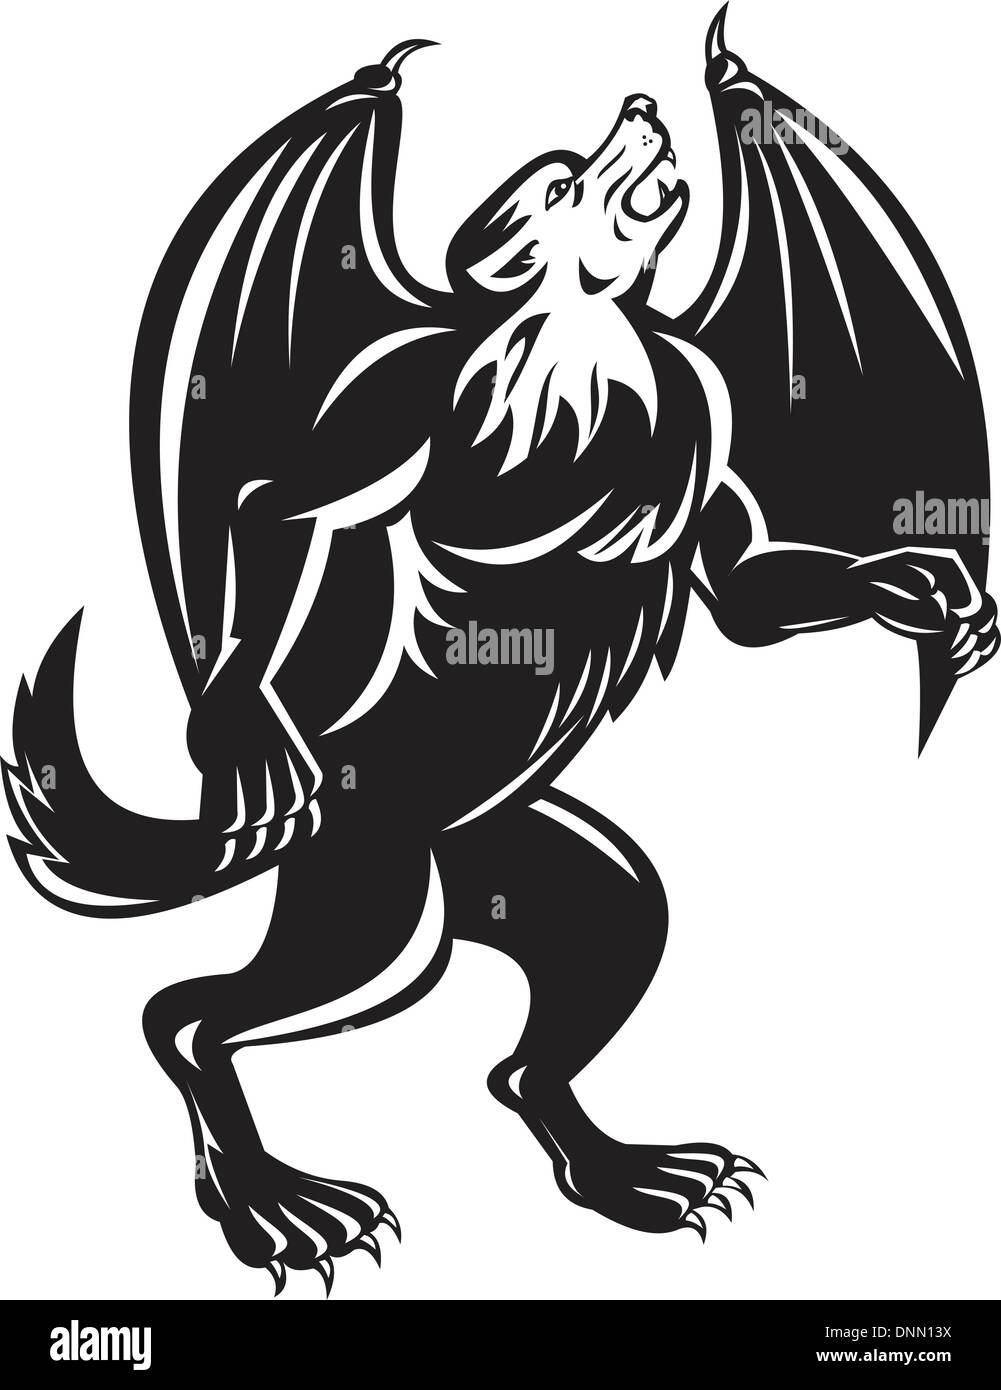 Illustration of a Kludde, a mythical Belgian beast that is a large black dog, with bat like wings and walks upright on itÕs hind legs facing side done in black and white on isolated white background. Stock Vector